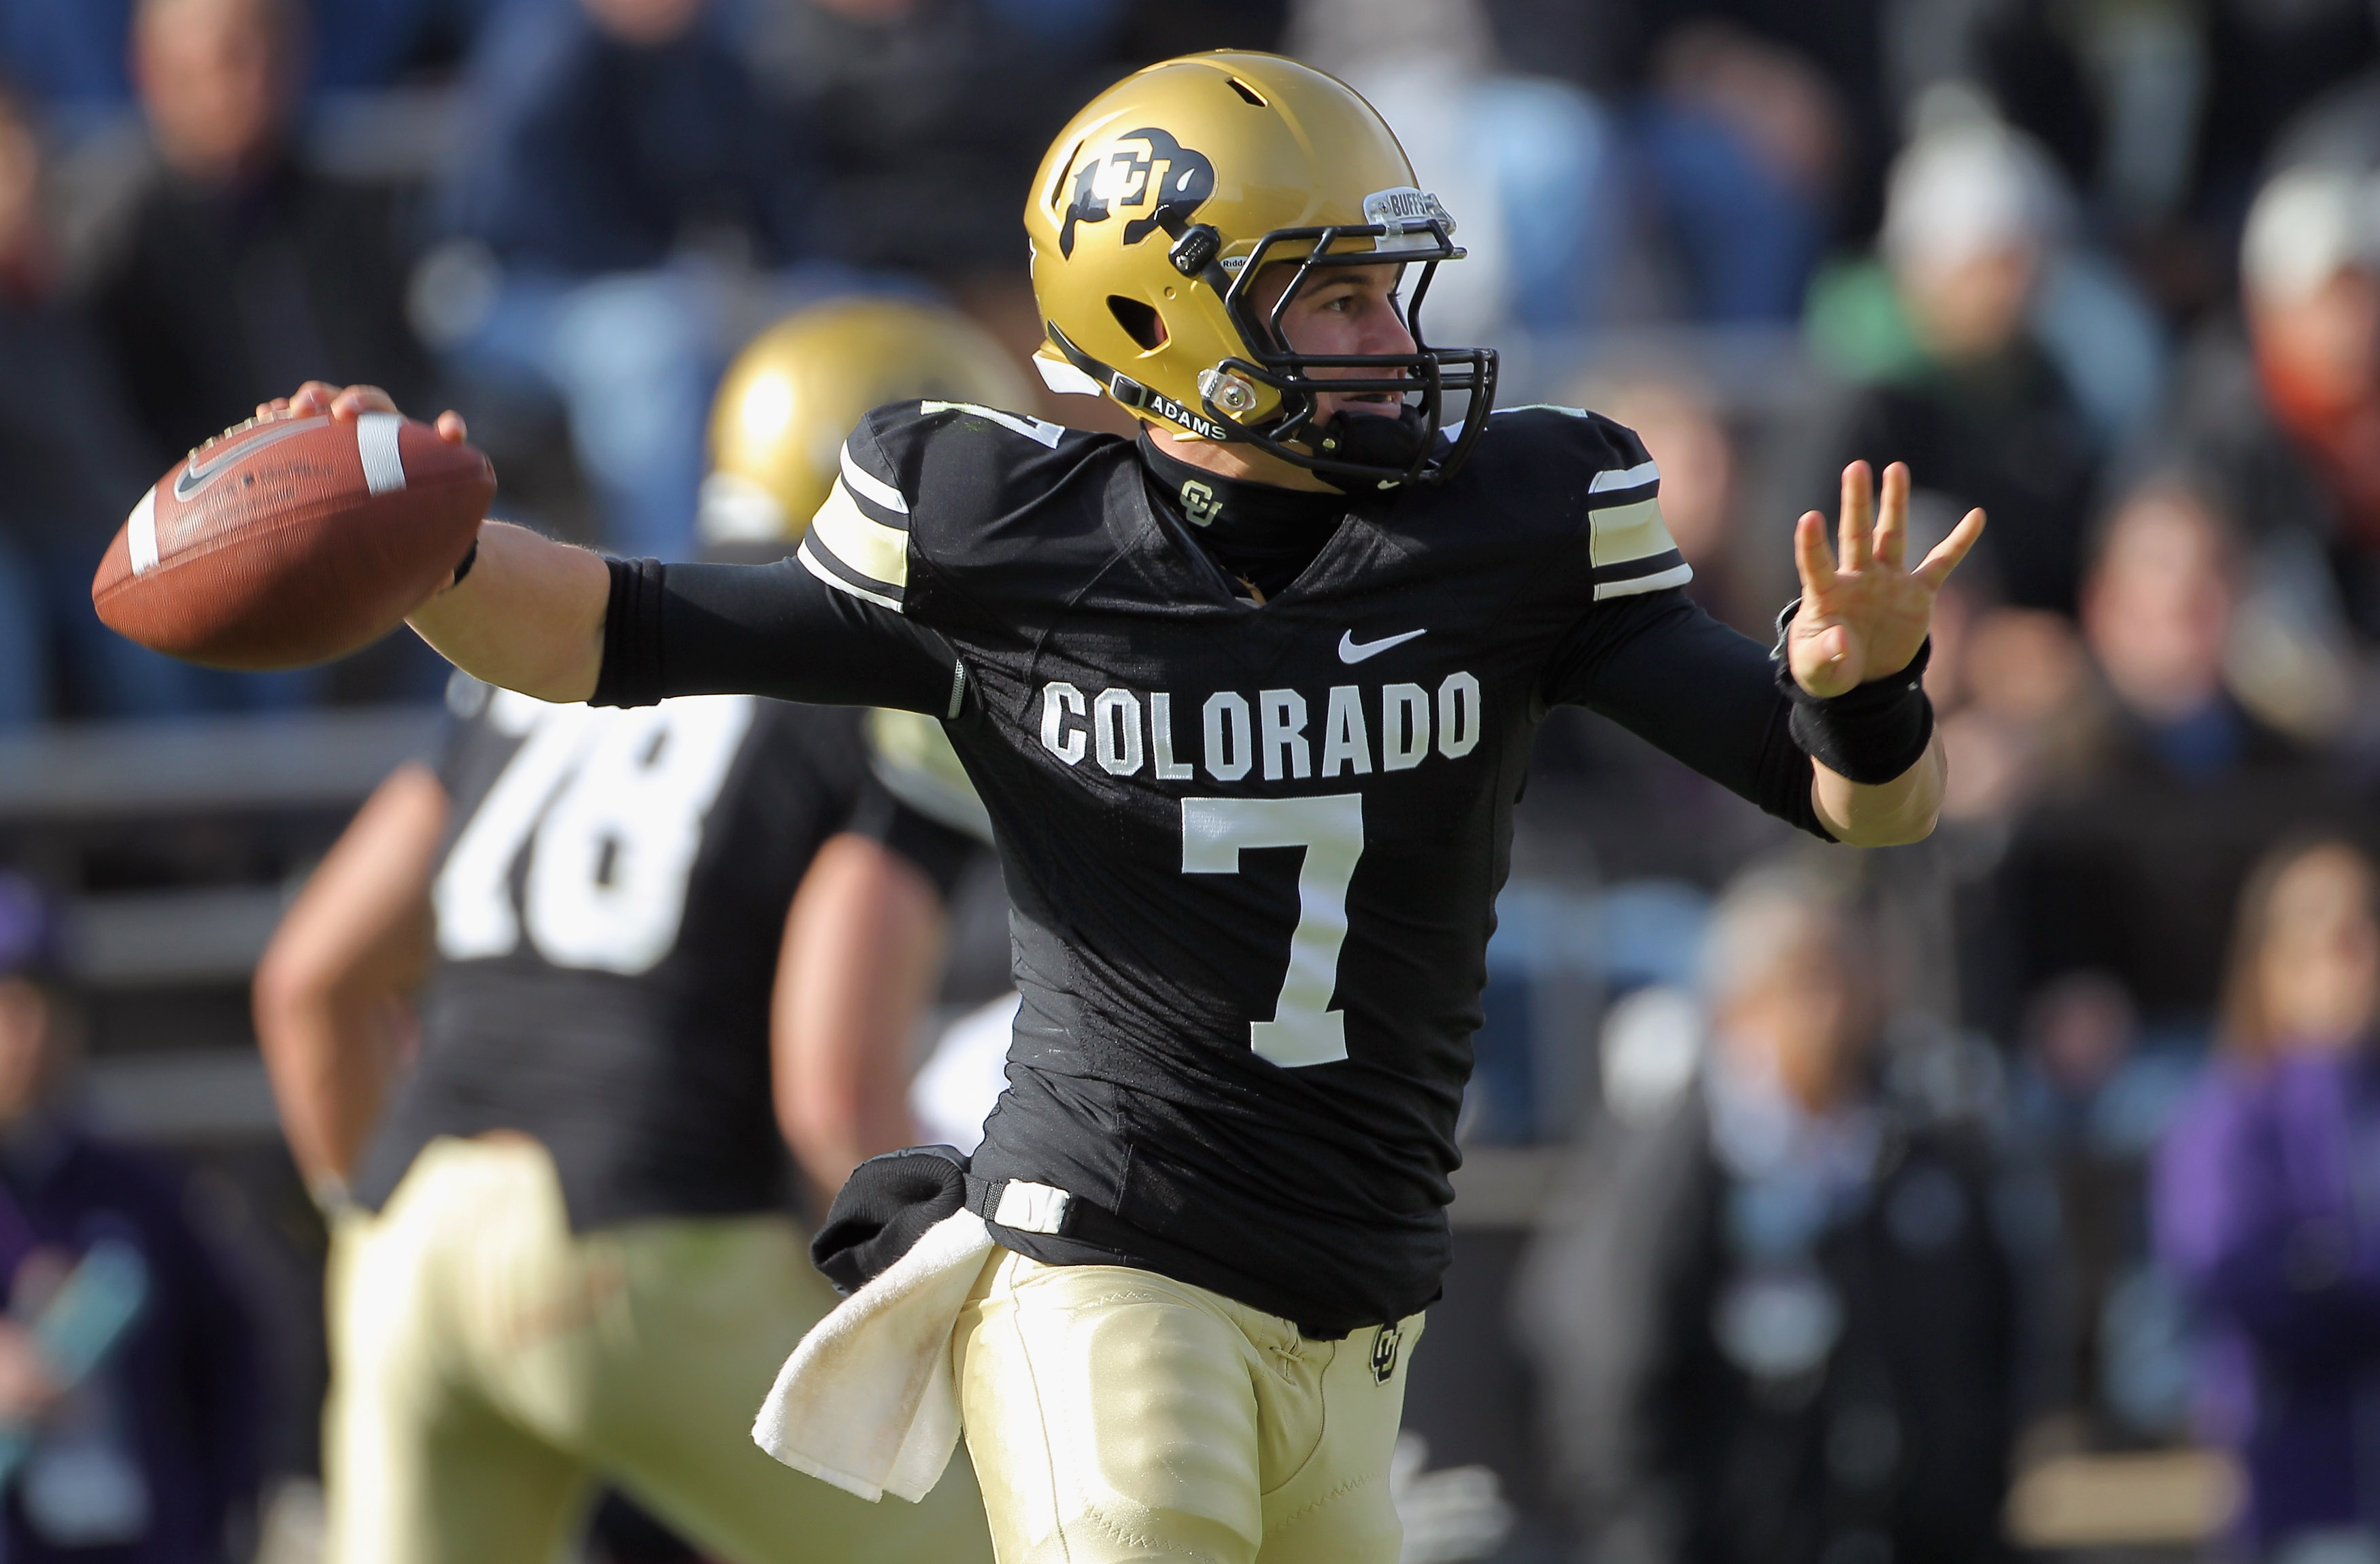 BOULDER, CO - NOVEMBER 20:  Quarterback Cody Hawkins #7 of the Colorado Buffaloes delivers a pass against the Kansas State Wildcats at Folsom Field on November 20, 2010 in Boulder, Colorado. Colorado defeated Kansas State 44-36.  (Photo by Doug Pensinger/